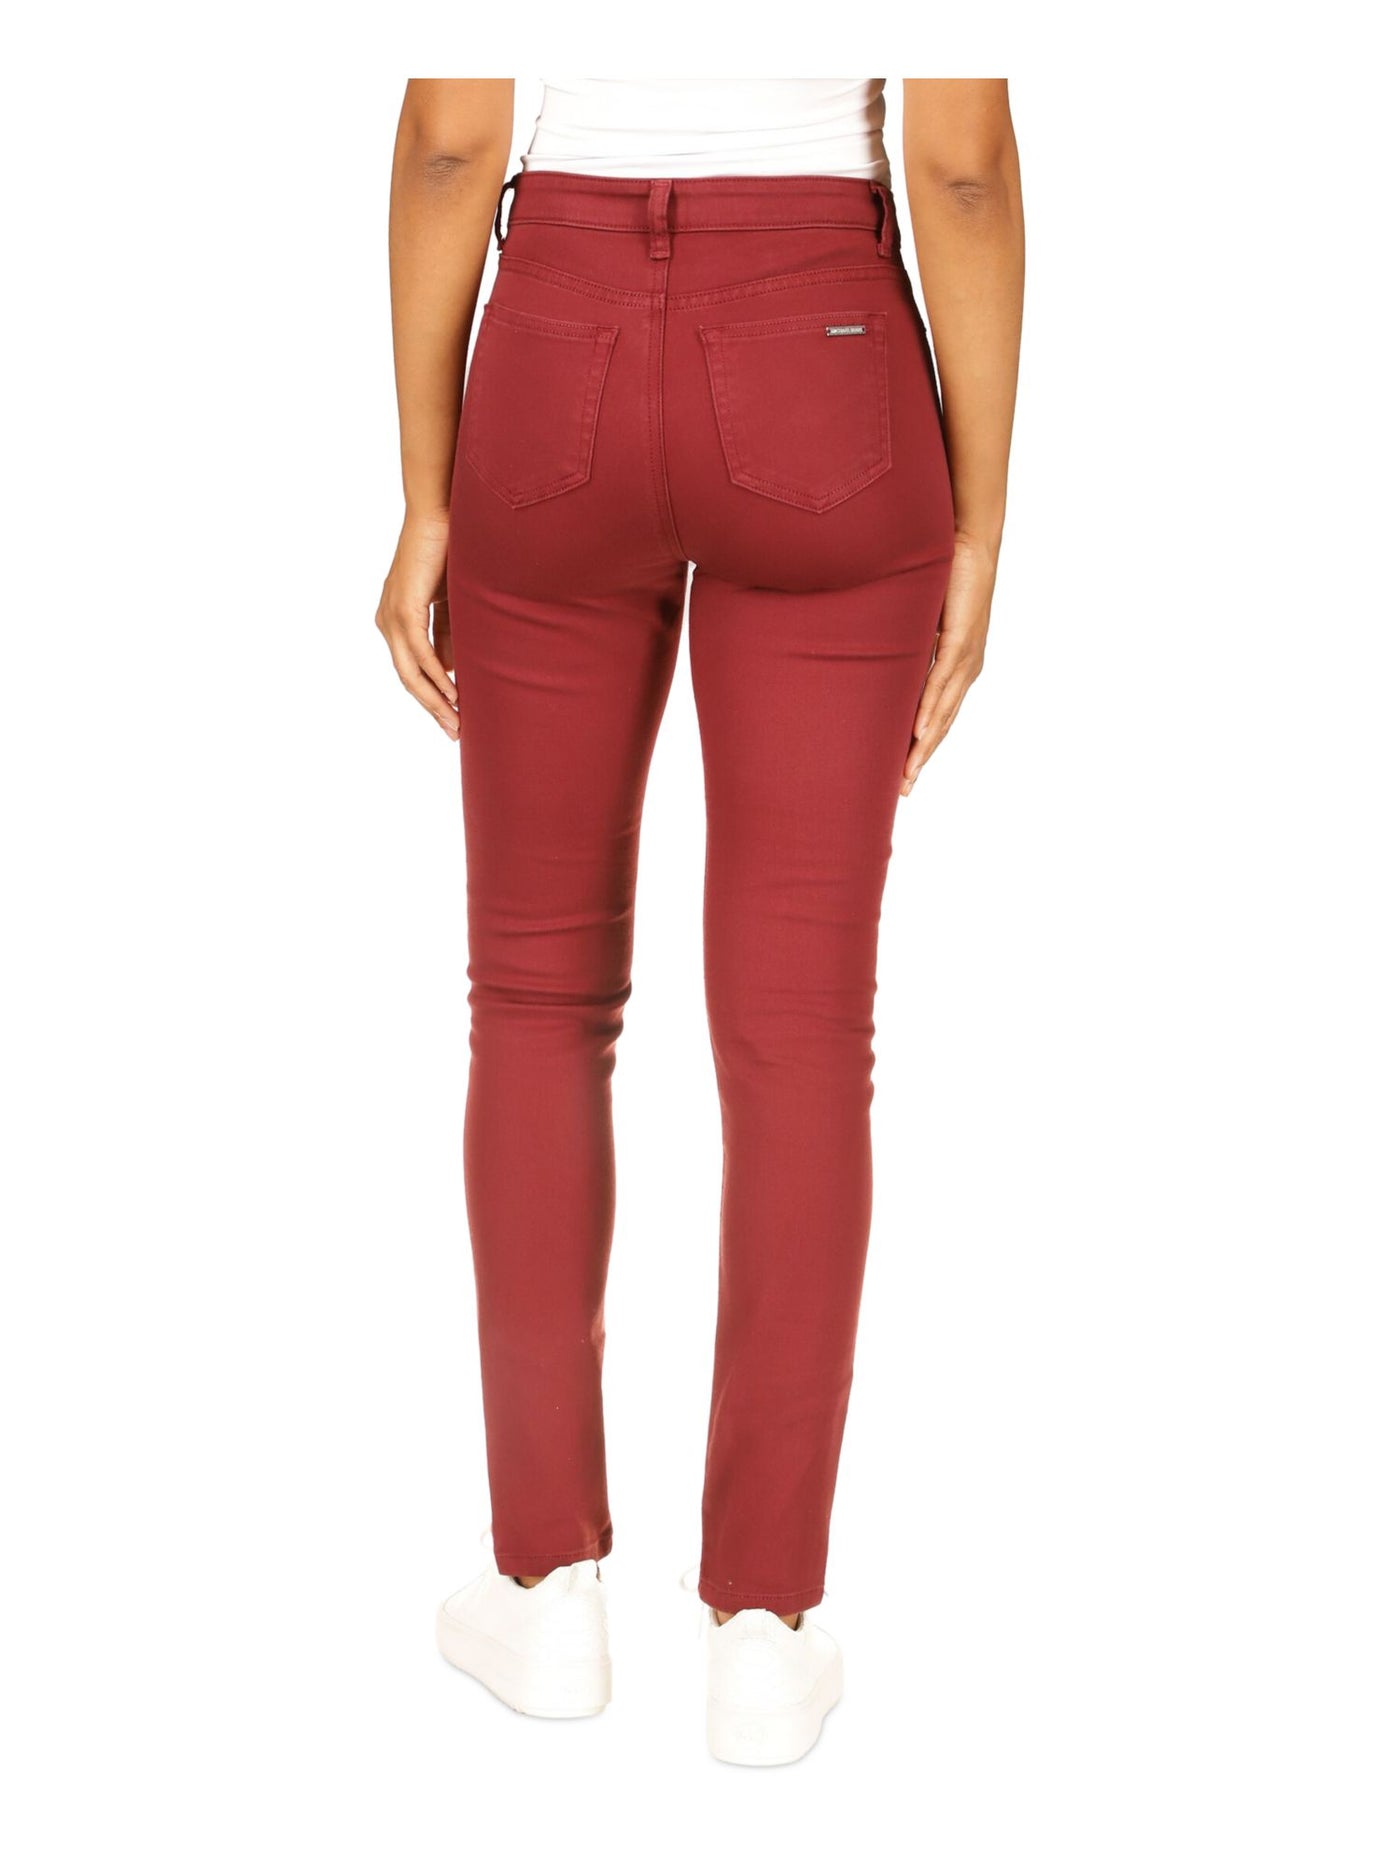 MICHAEL MICHAEL KORS Womens Red Zippered Pocketed Skinny High Waist Jeans Petites 2P